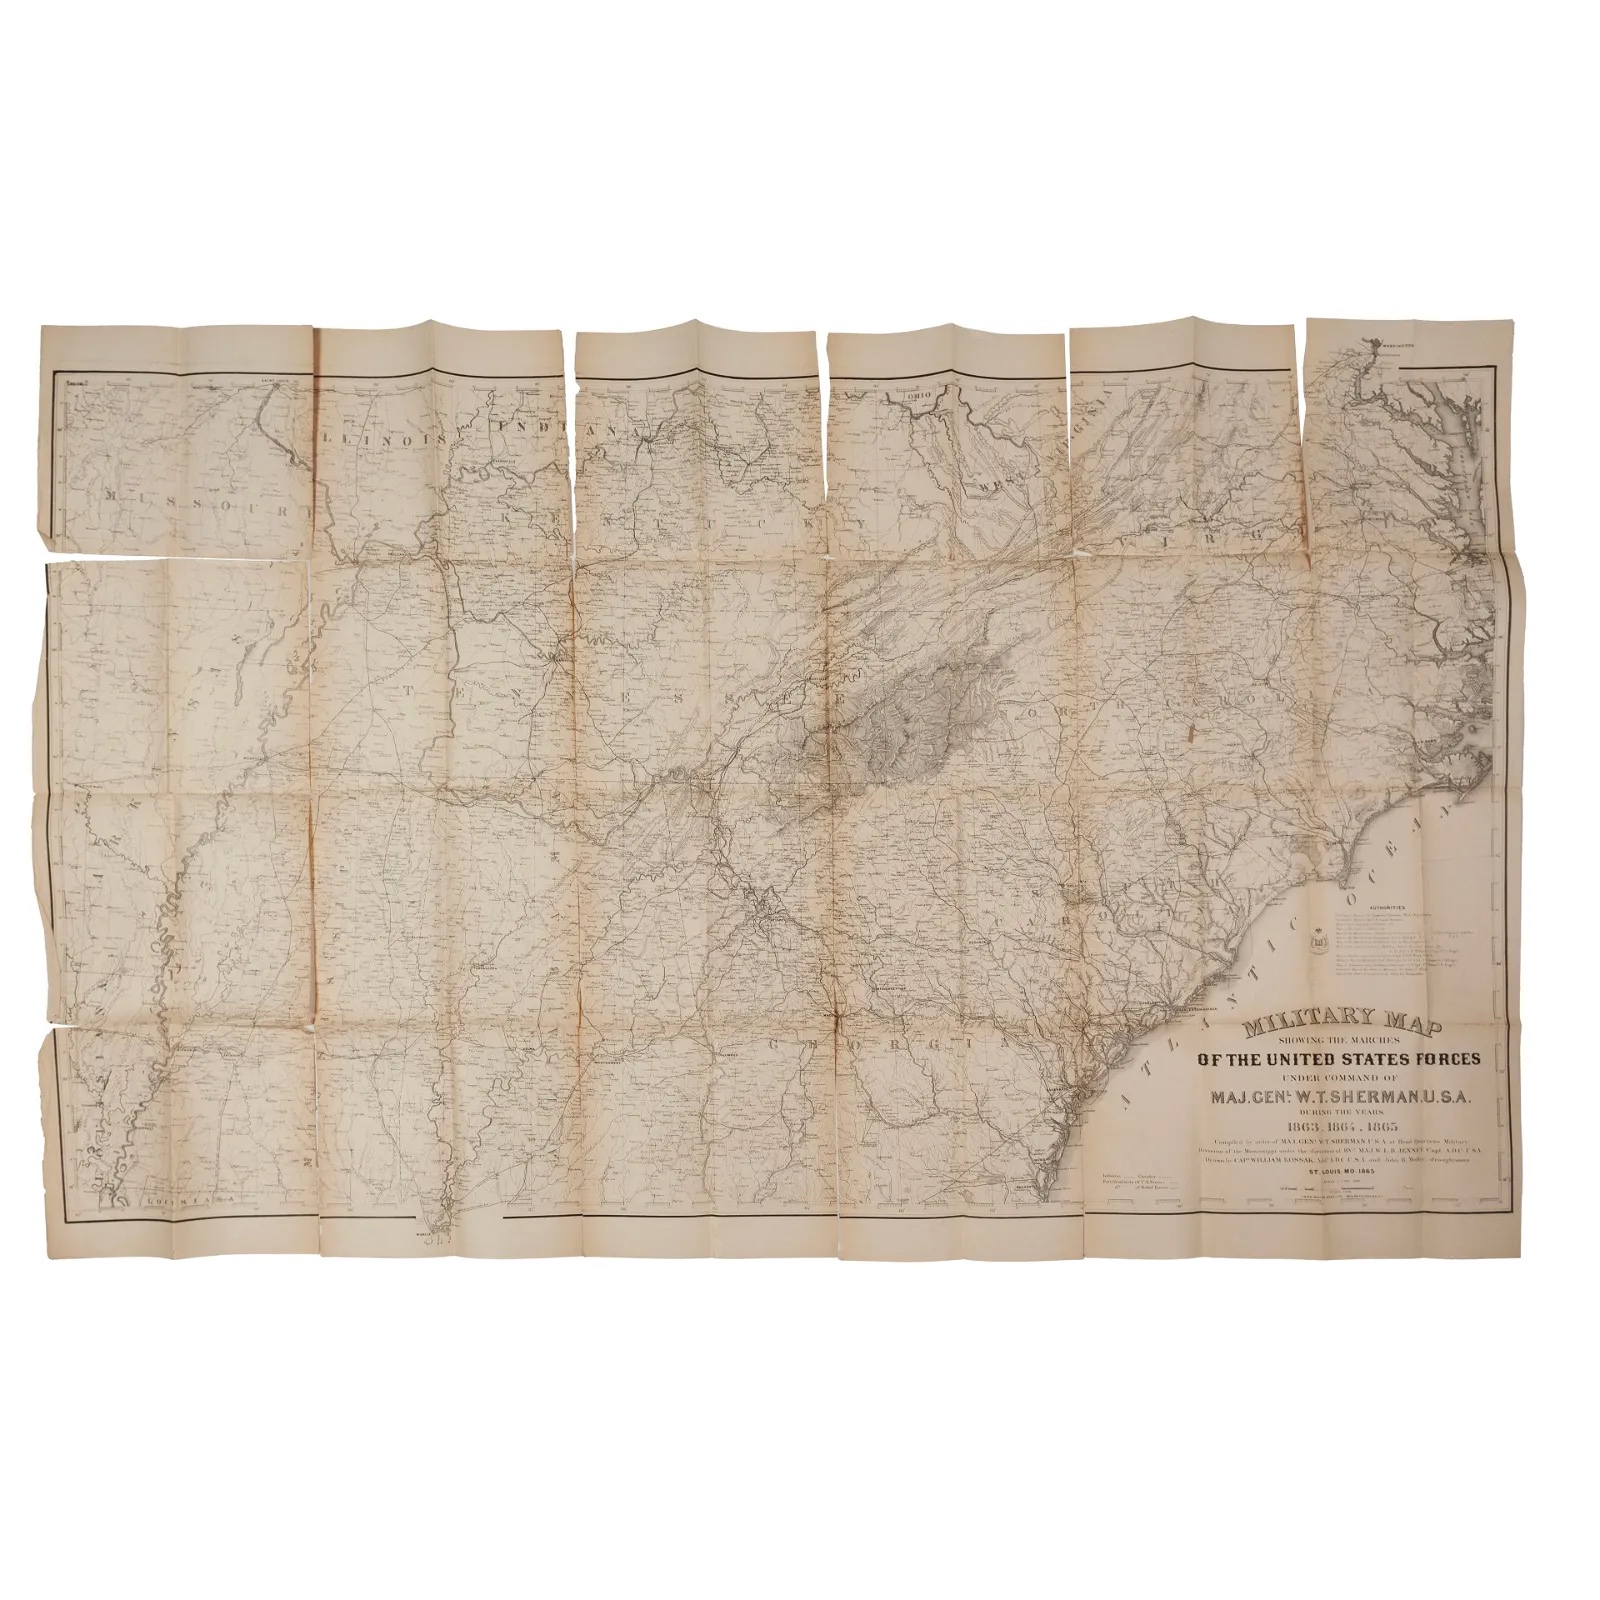 General W. T. Sherman's personal copy of a map detailing his campaigns, printed in 1865 after the close of the war, estimated at $750-$1,500 at Fleischer's.